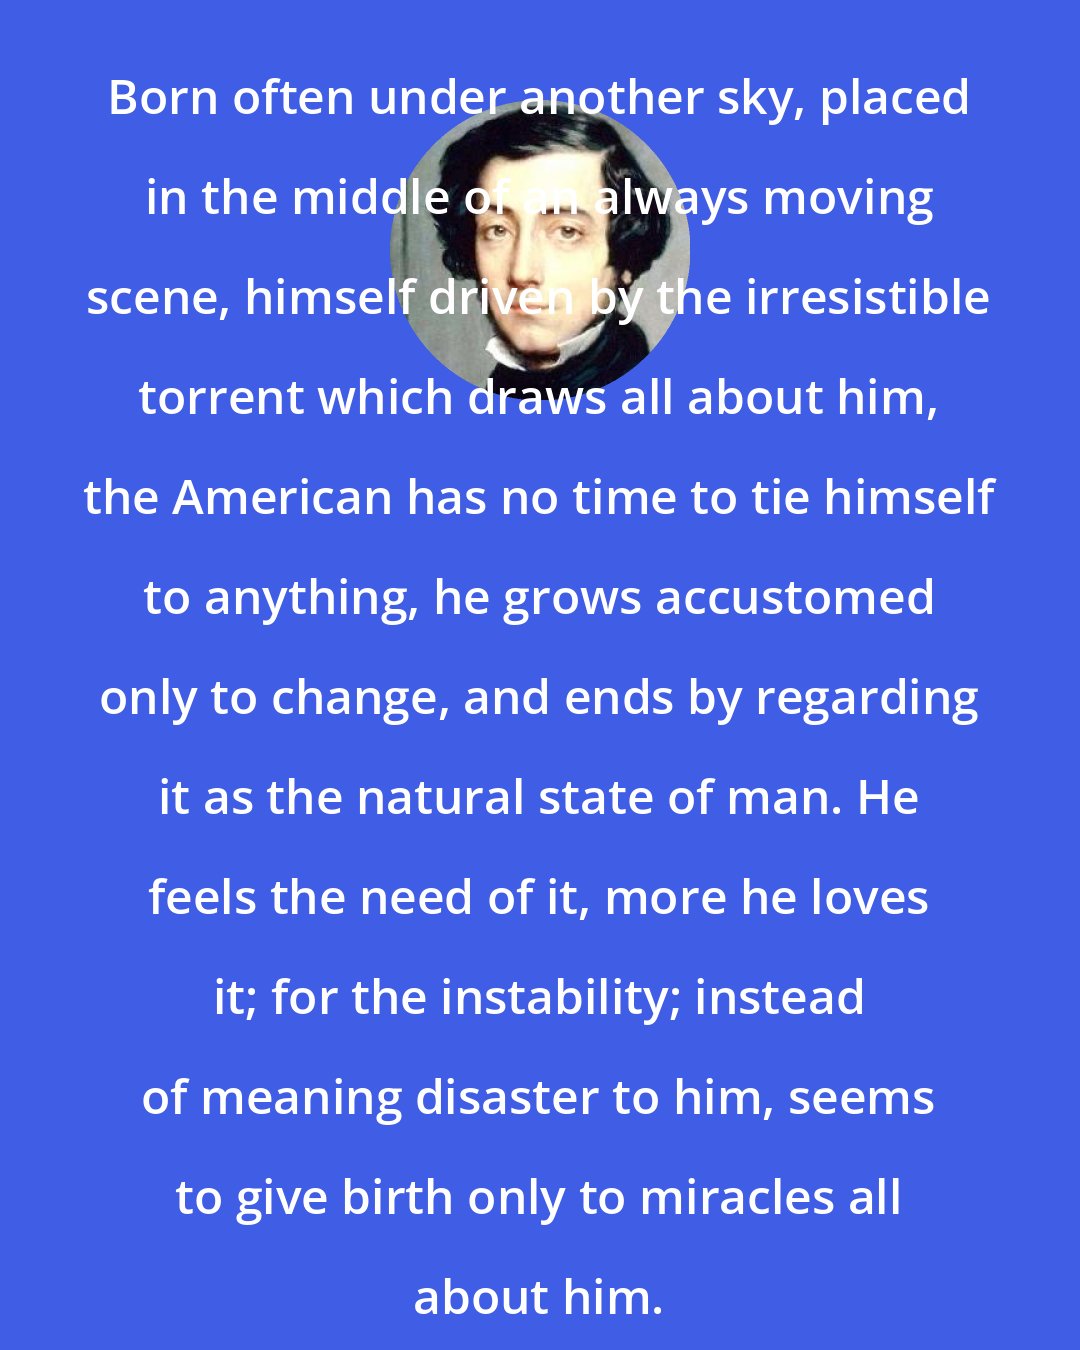 Alexis de Tocqueville: Born often under another sky, placed in the middle of an always moving scene, himself driven by the irresistible torrent which draws all about him, the American has no time to tie himself to anything, he grows accustomed only to change, and ends by regarding it as the natural state of man. He feels the need of it, more he loves it; for the instability; instead of meaning disaster to him, seems to give birth only to miracles all about him.